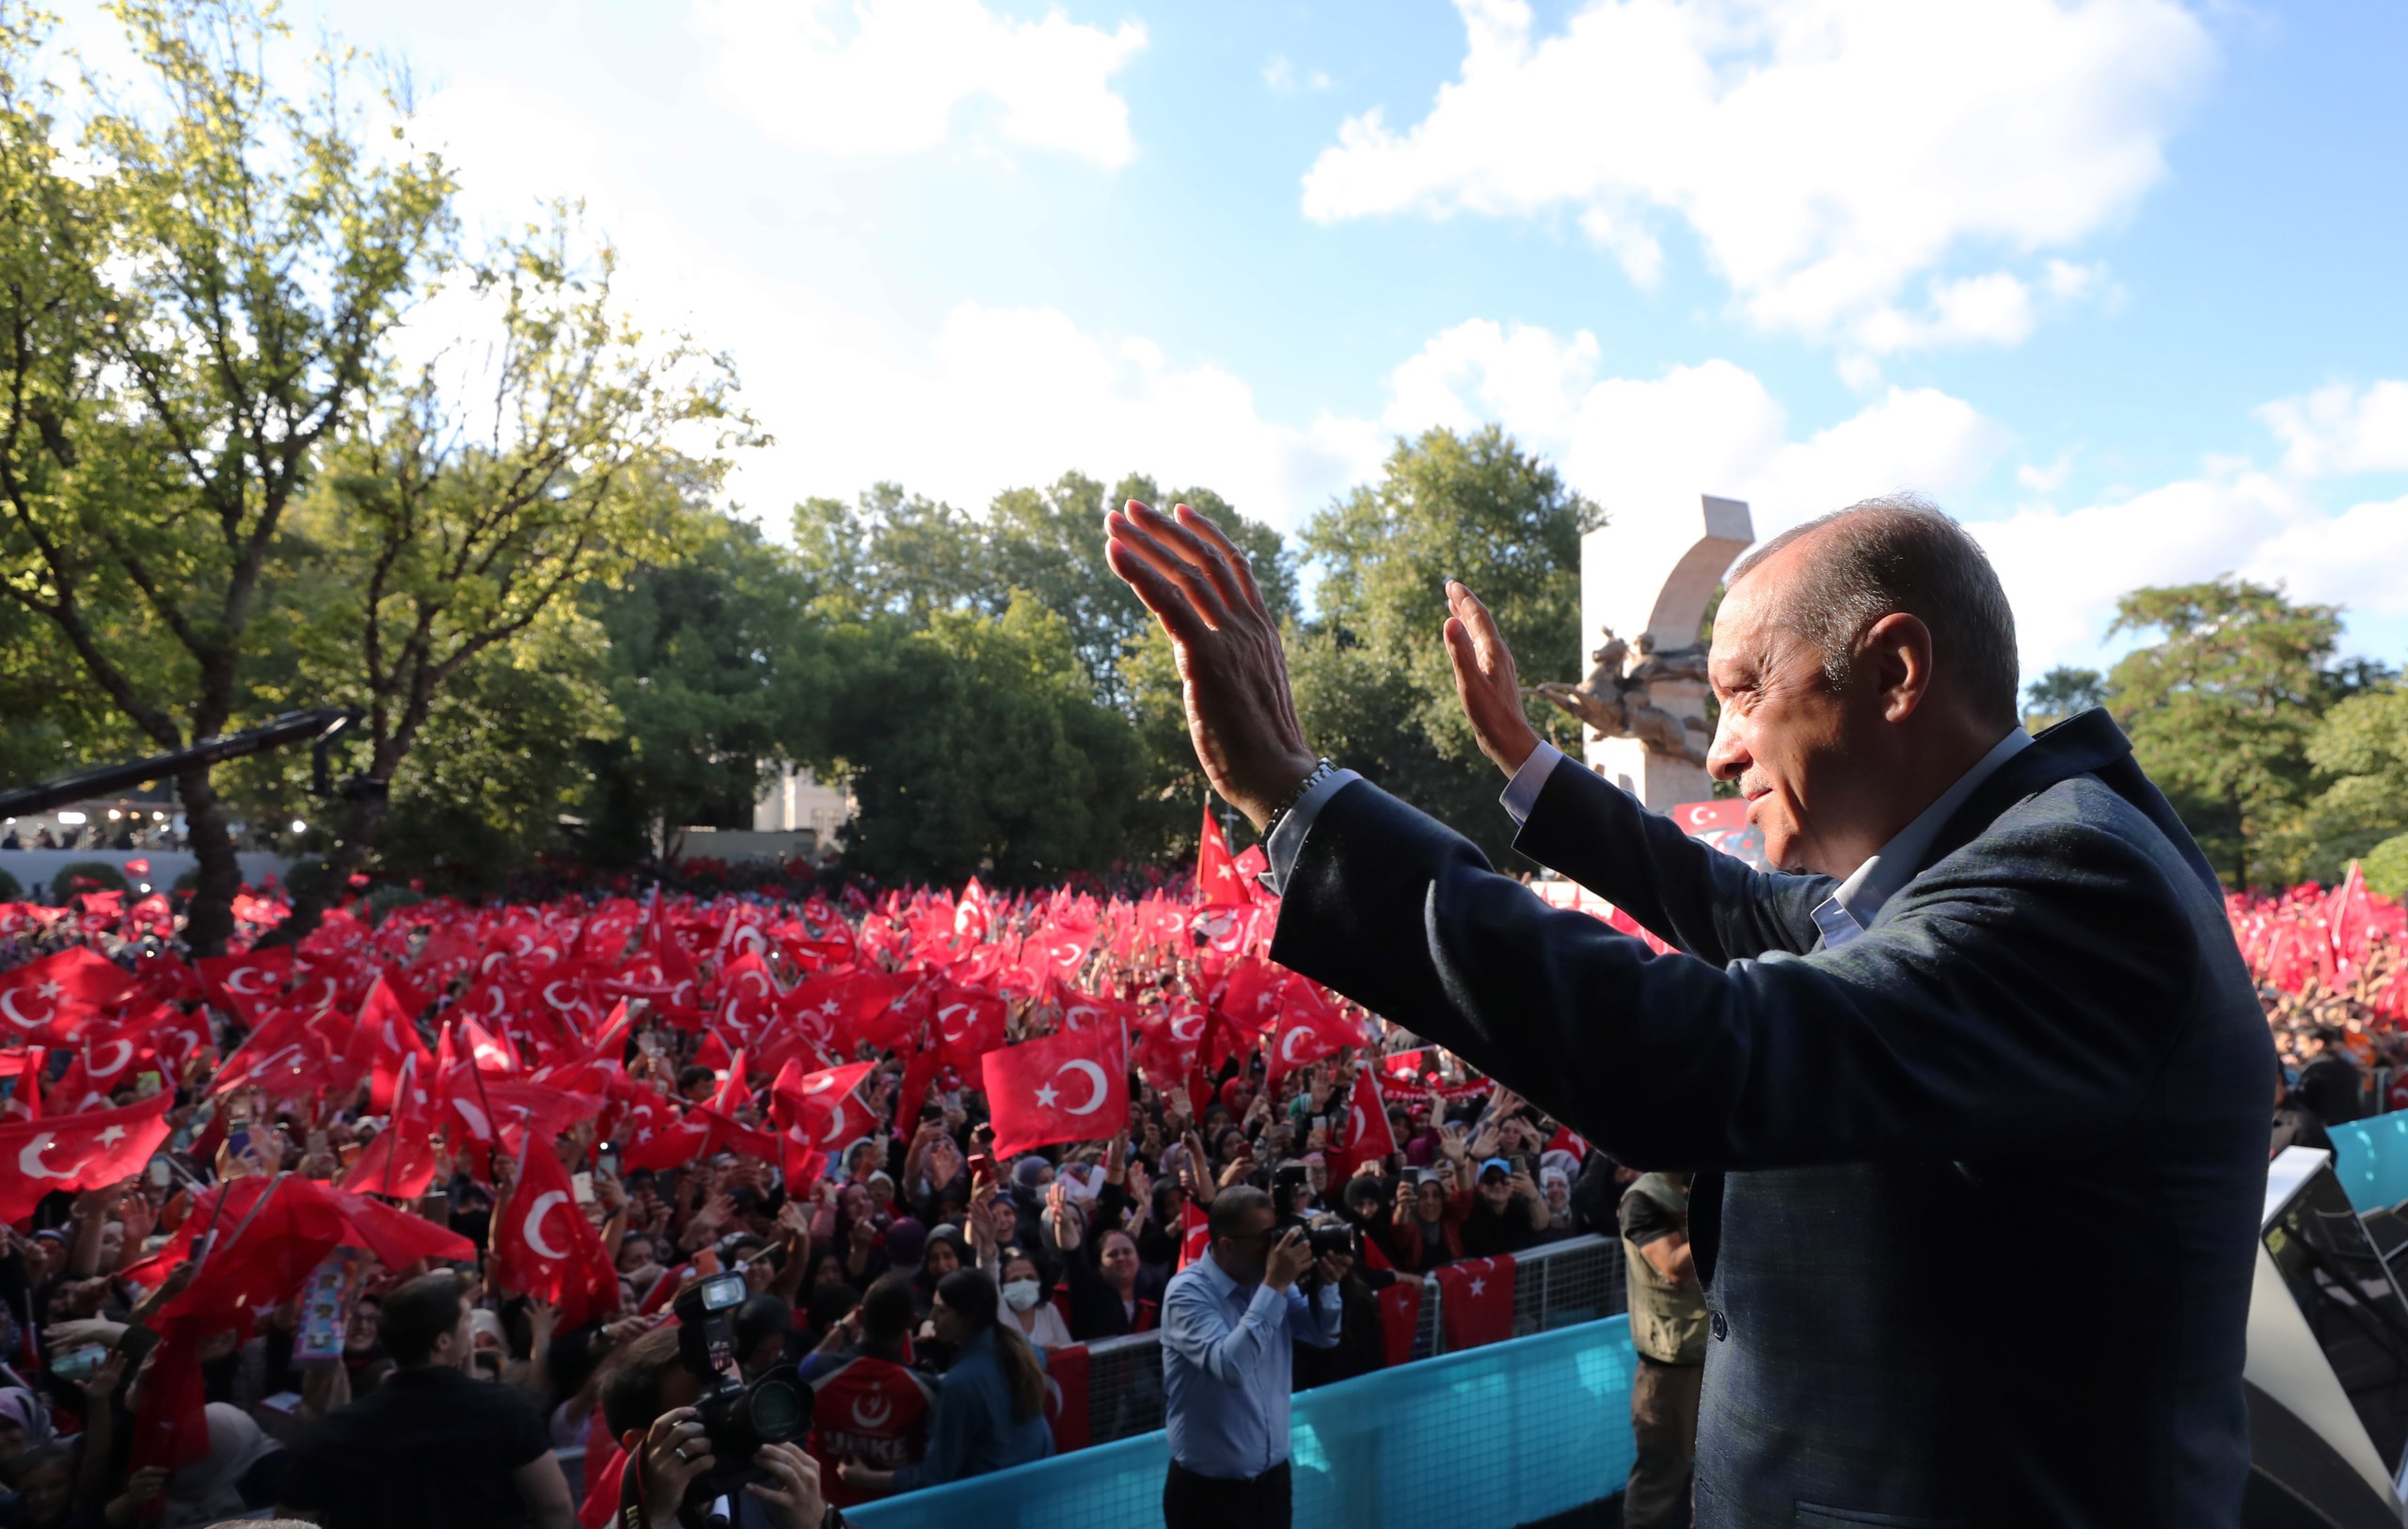 epa10072802 A handout photo made available by Turkish President Press Office shows, Turkish President Recep Tayyip Erdogan greets supporters during a rally marking the 6th anniversary of the failed coup attempt, in Istanbul, Turkey, 15 July 2022. Turkey marks the sixth anniversary of the failed coup attempt which led to some 50 thousand workers being dismissed, some eight thousand people arrested, and scores of news outlets shut down by the government. Turkish military factions on 15 July 2016 attempted a coup for which Turkish President Recep Tayyip Erdogan blamed US-based Turkish cleric Fethullah Gulen and his movement to allegedly have masterminded the attempt.  EPA/TURKISH PRESIDNET PRESS OFFICE HANDOUT  HANDOUT EDITORIAL USE ONLY/NO SALES